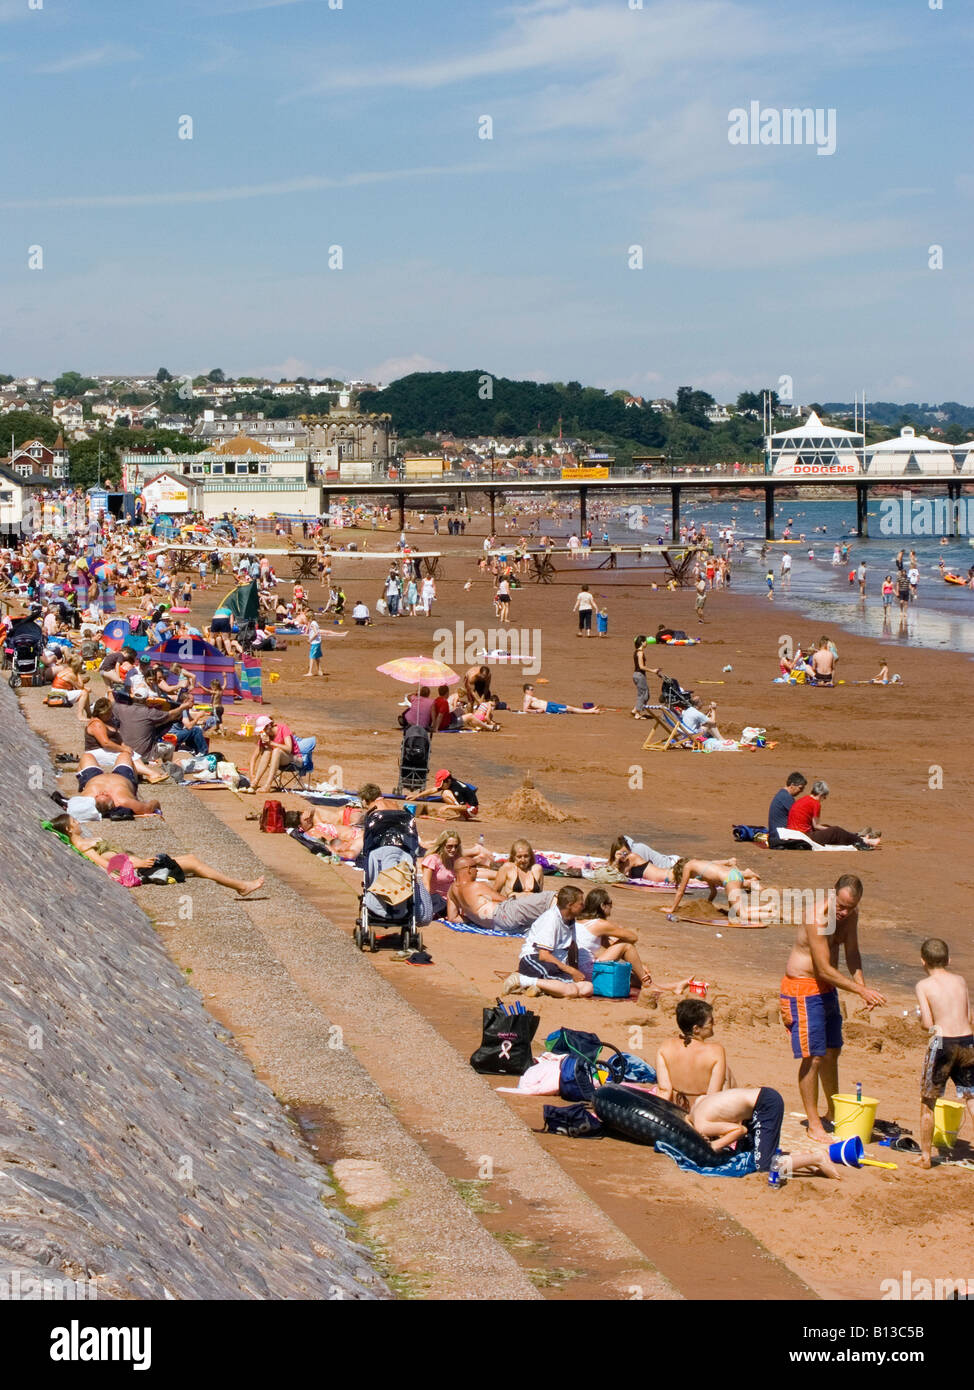 Holidaymakers enjoying the summer sun on the beach and on the leisure pier. Paignton, Devon UK Stock Photo